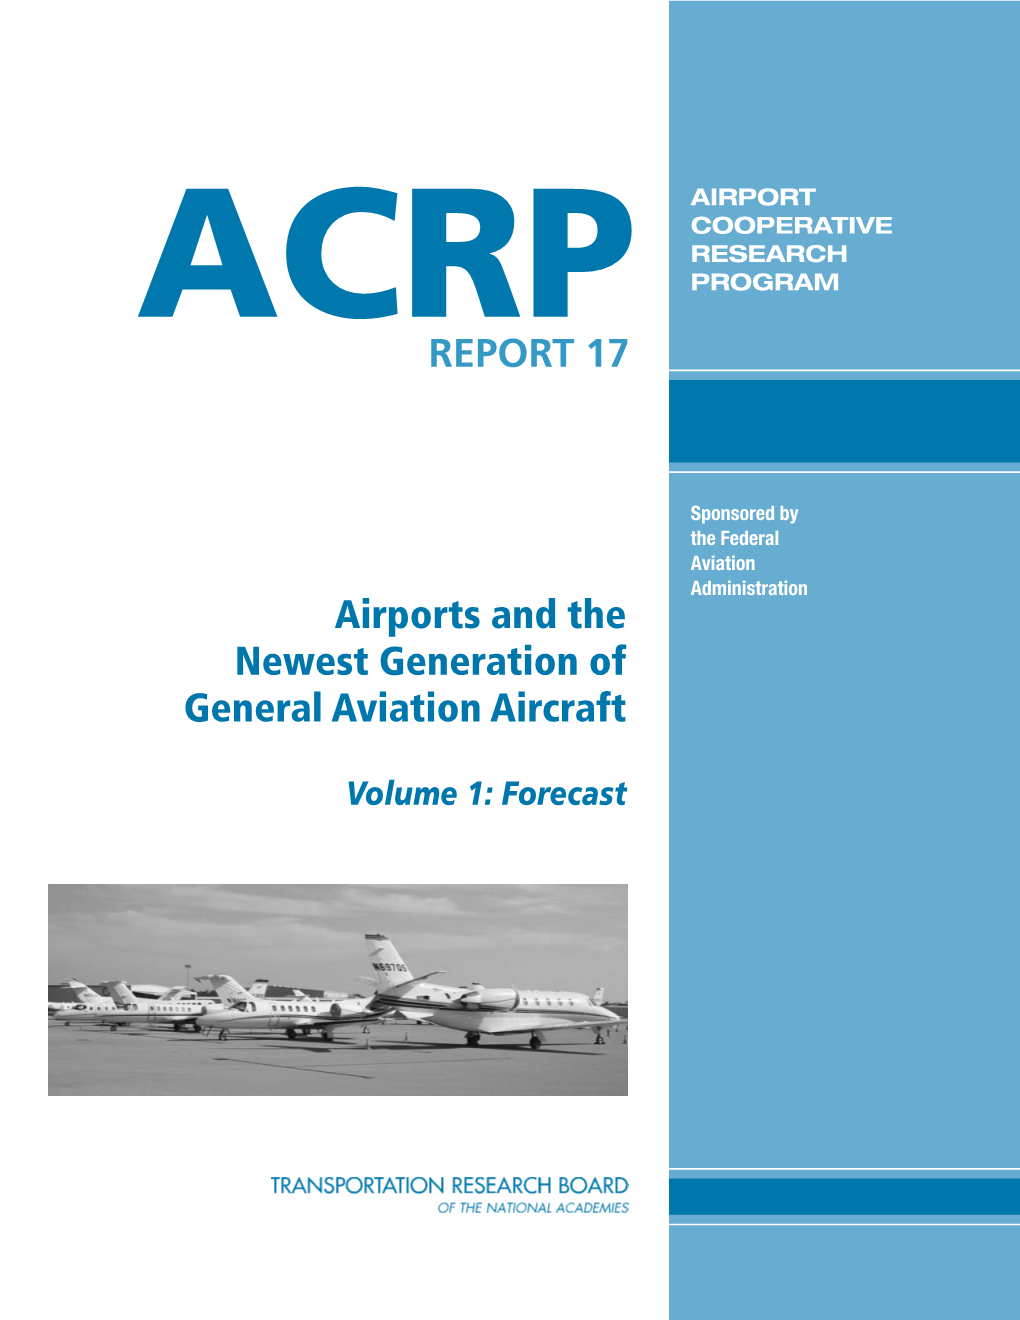 ACRP Report 17 – Airports and the Newest Generation of General